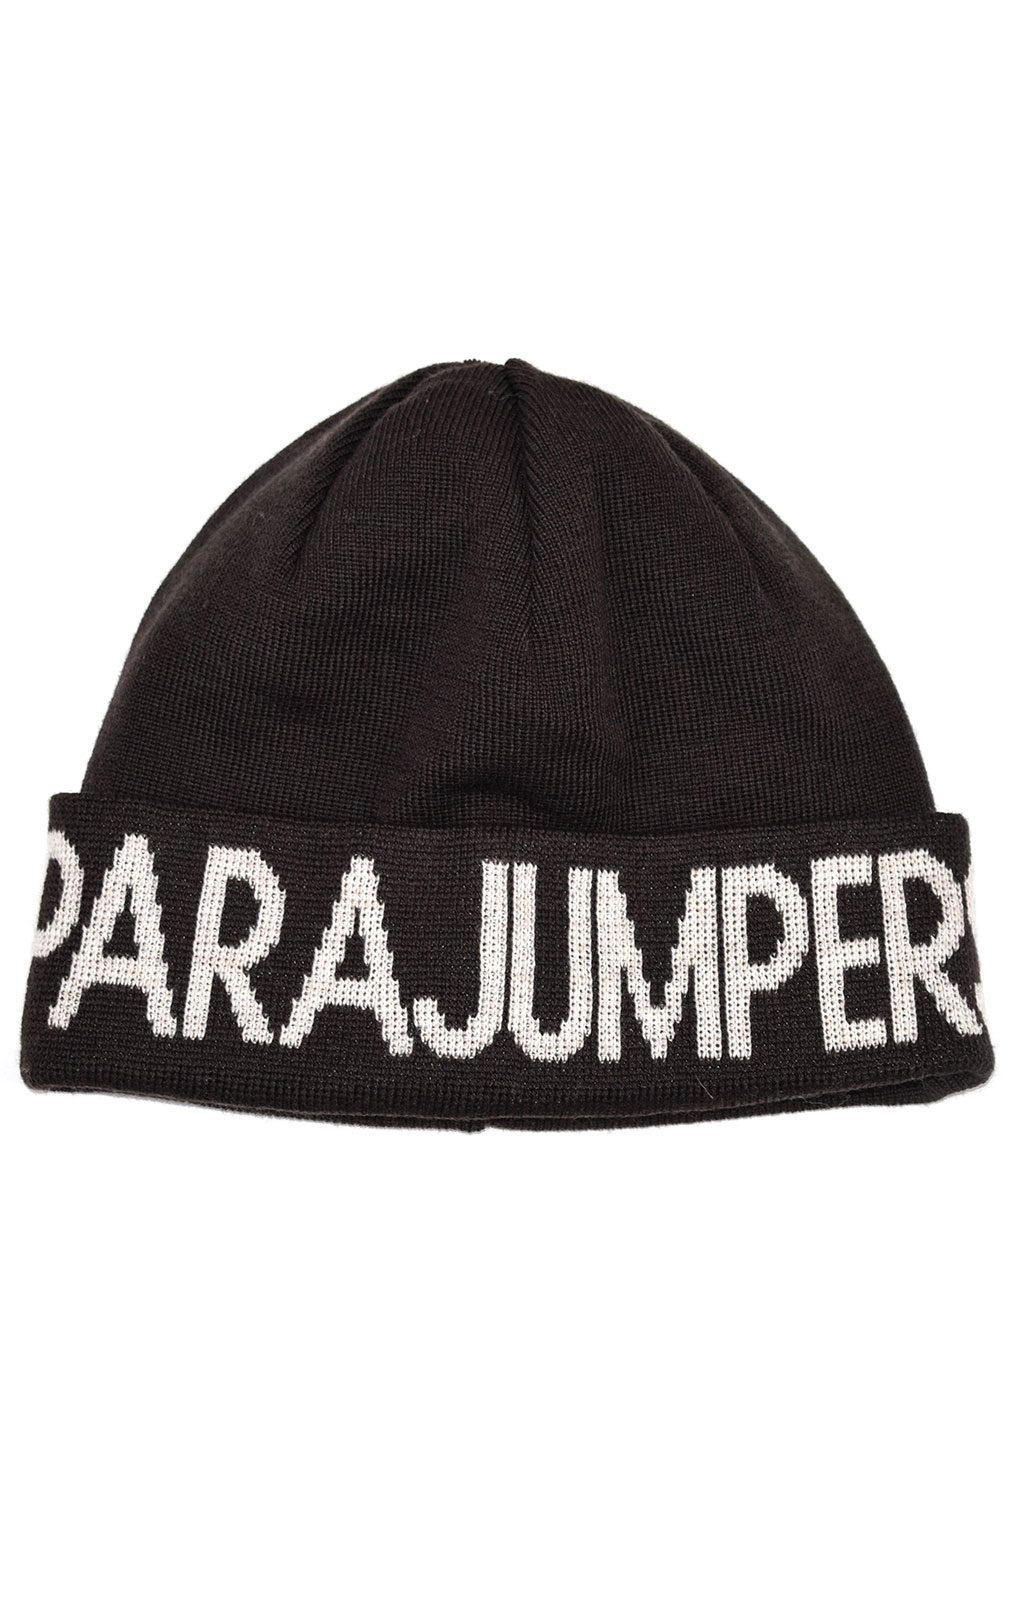 Шапка вязаная PARAJUMPERS PARAJUMPERS HAT FW 19/20 rave 